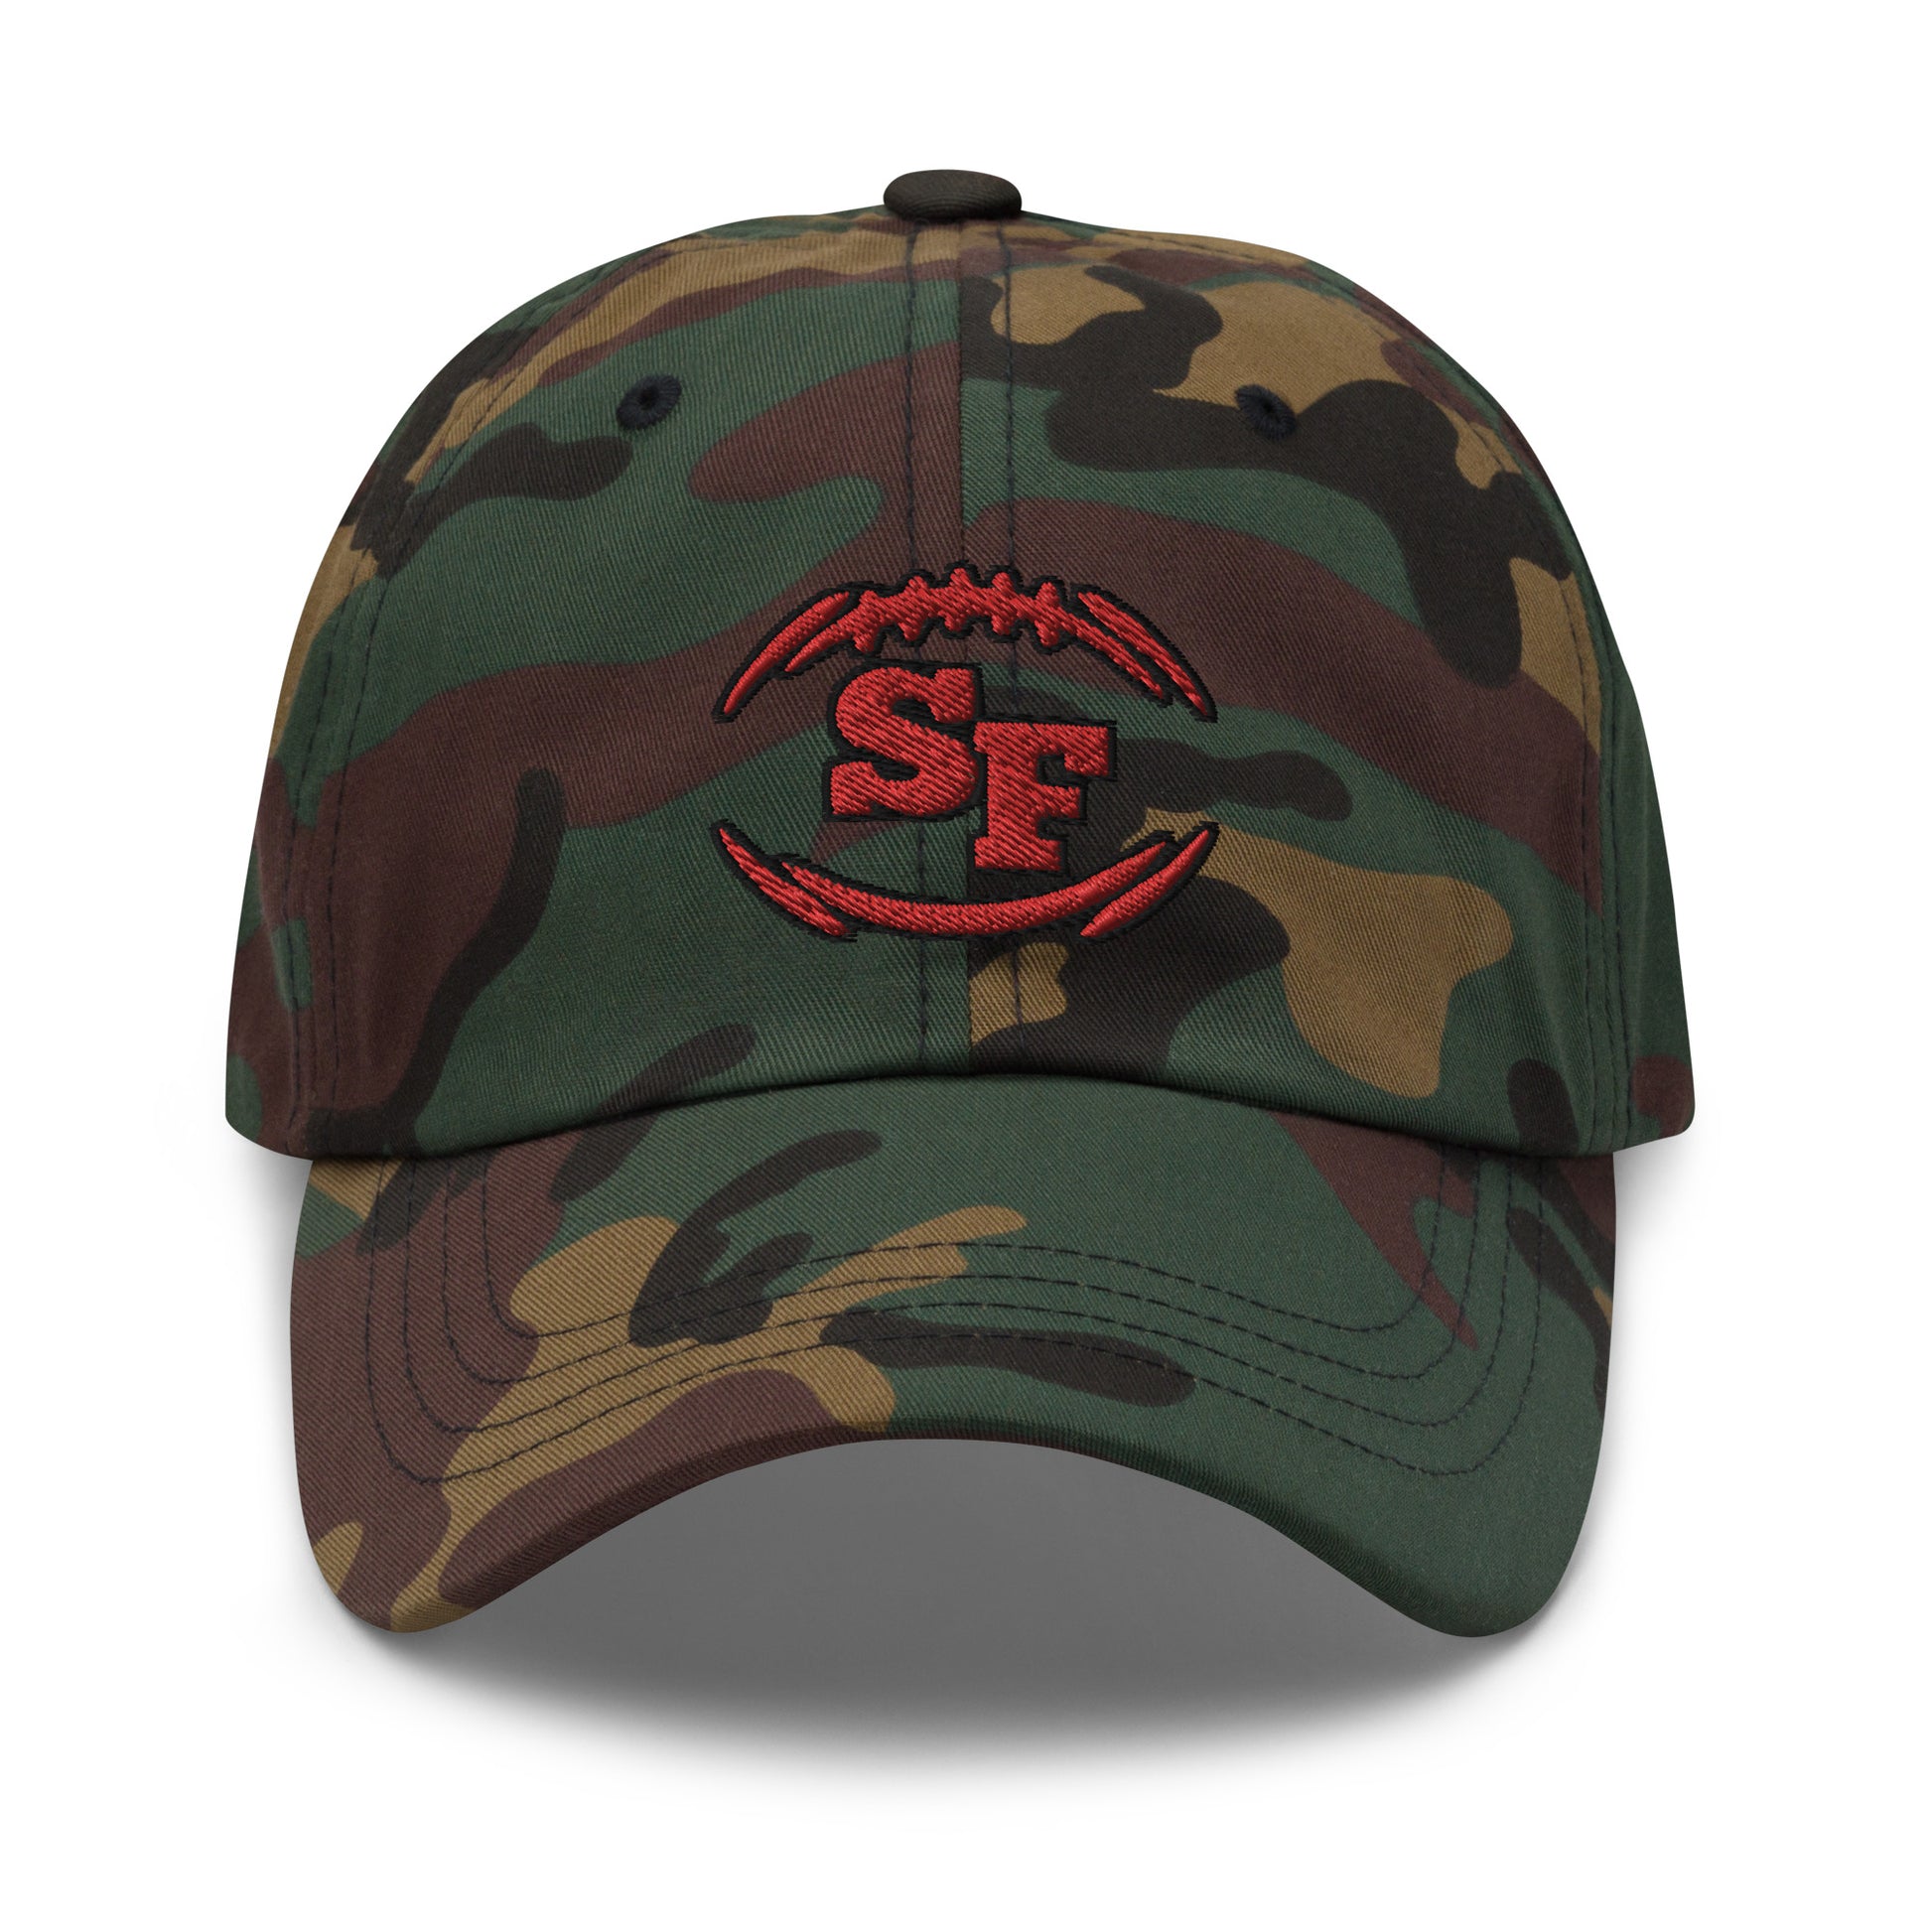 San Diego Padres Camo Hats, Padres Camouflage Shirts, Gear